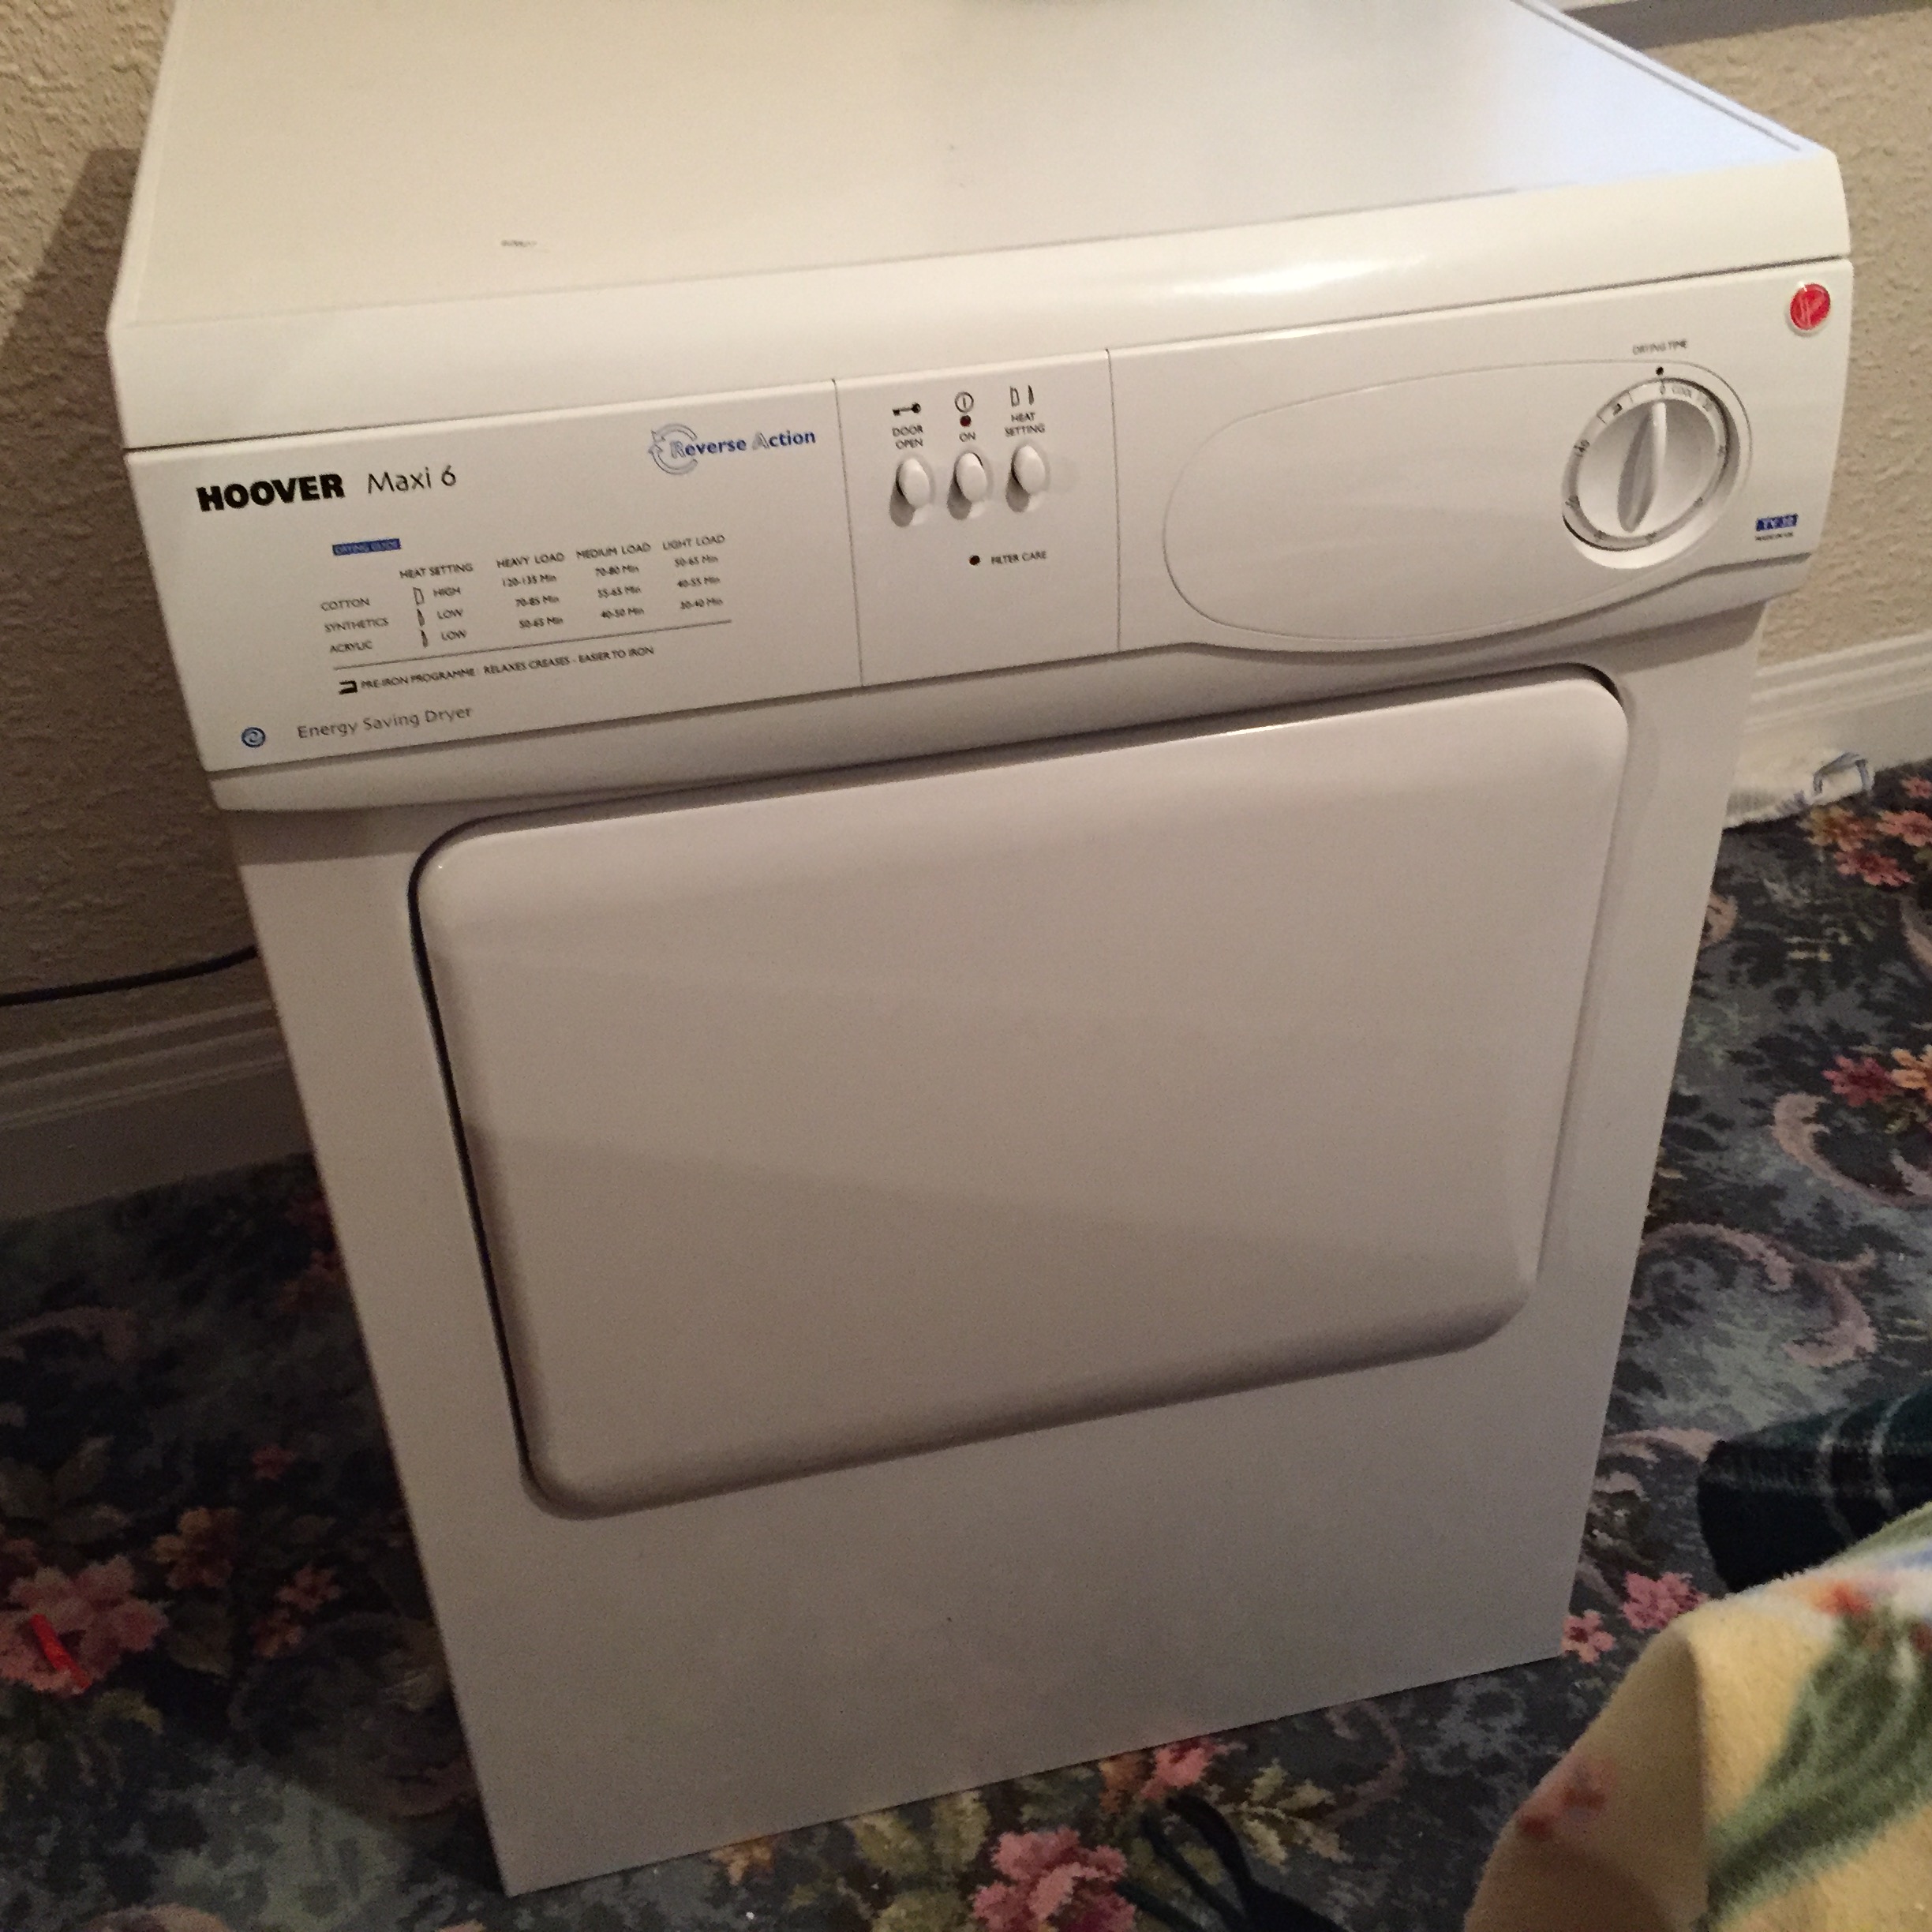 A Hoover Maxi 6 Tumble dryer.